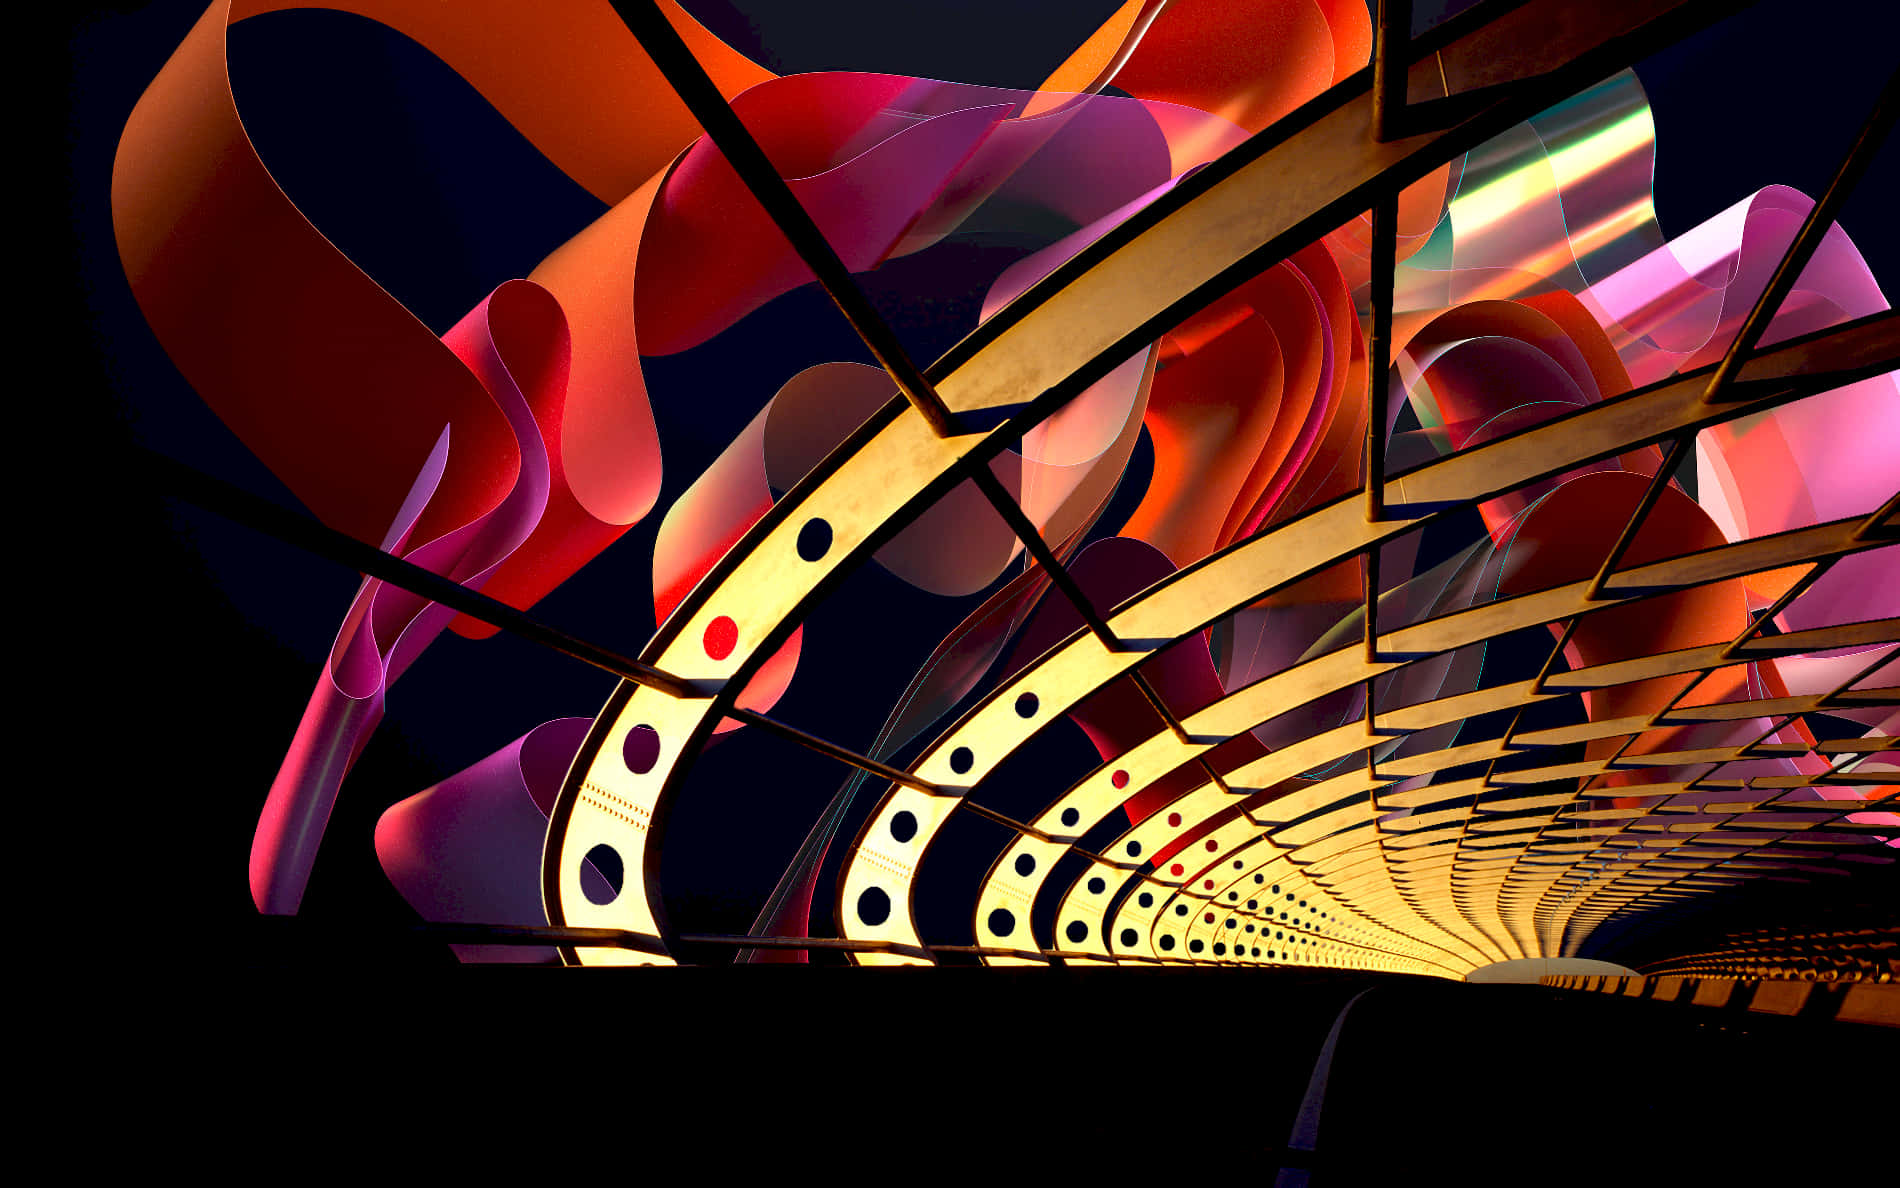 Abstract Architecture Tunnel Lights Wallpaper